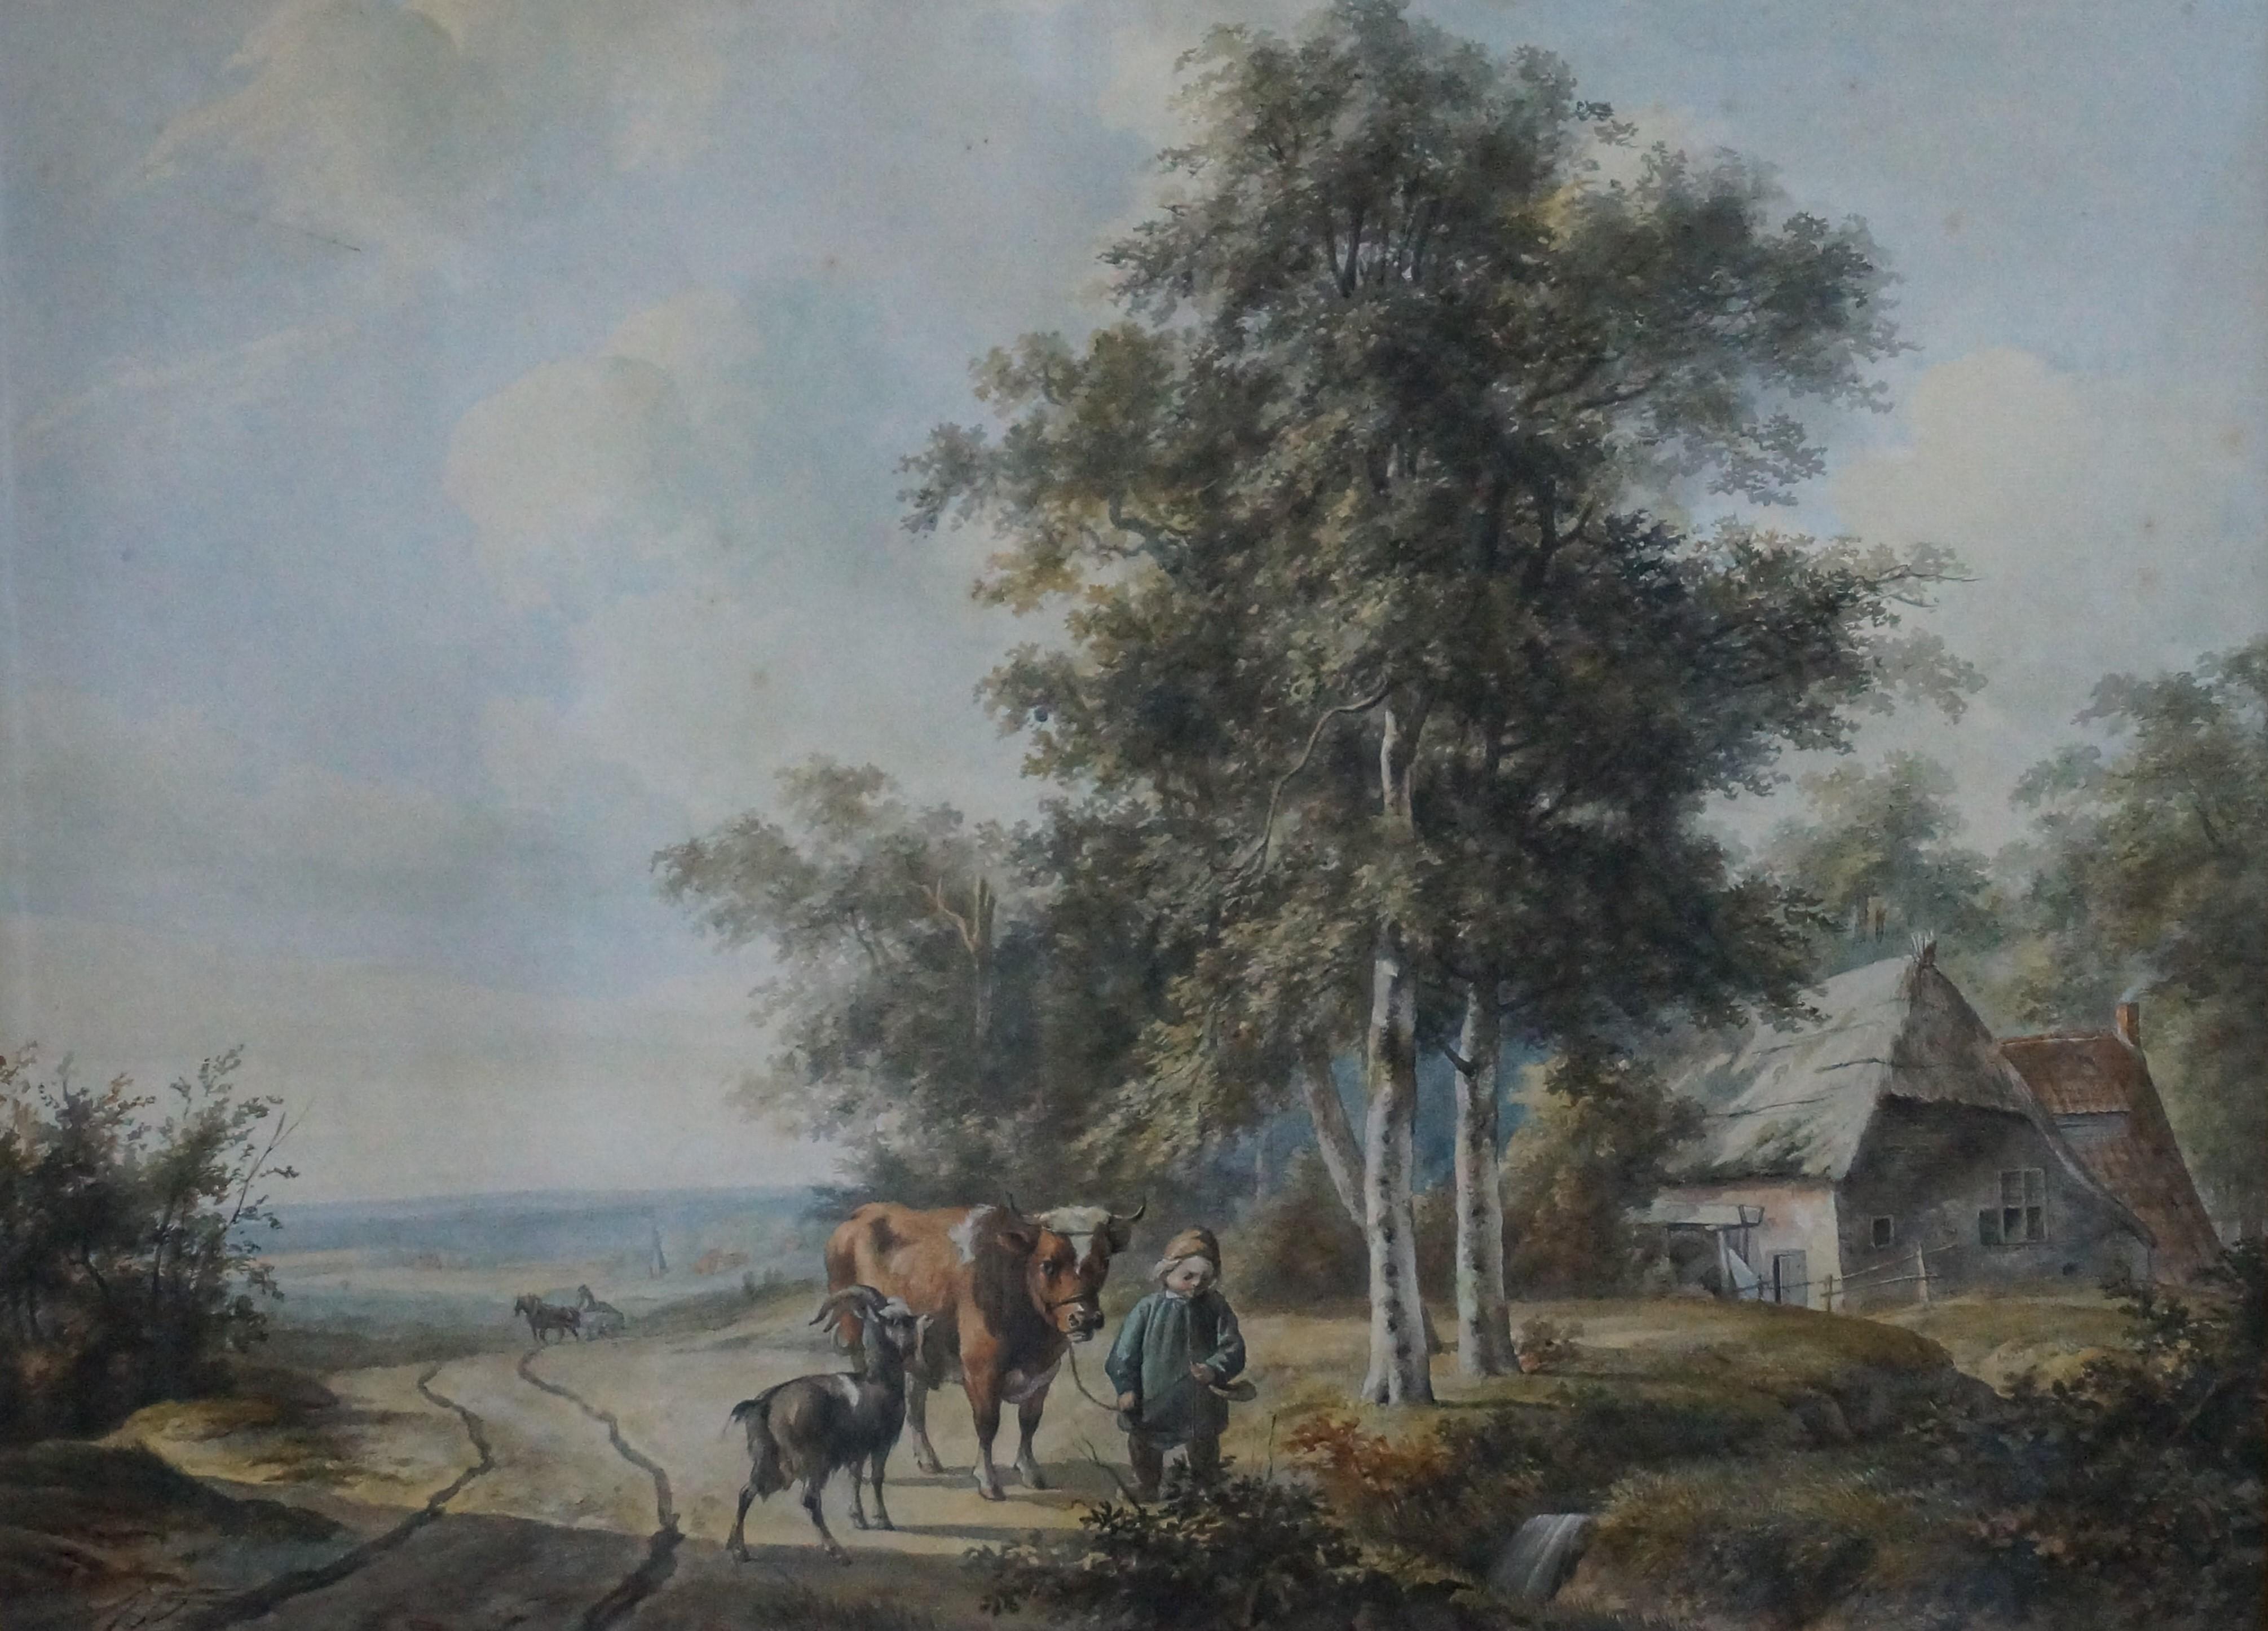 Landscape with cattle in watercolor - Romantic Art by Abraham Hendrik Winter